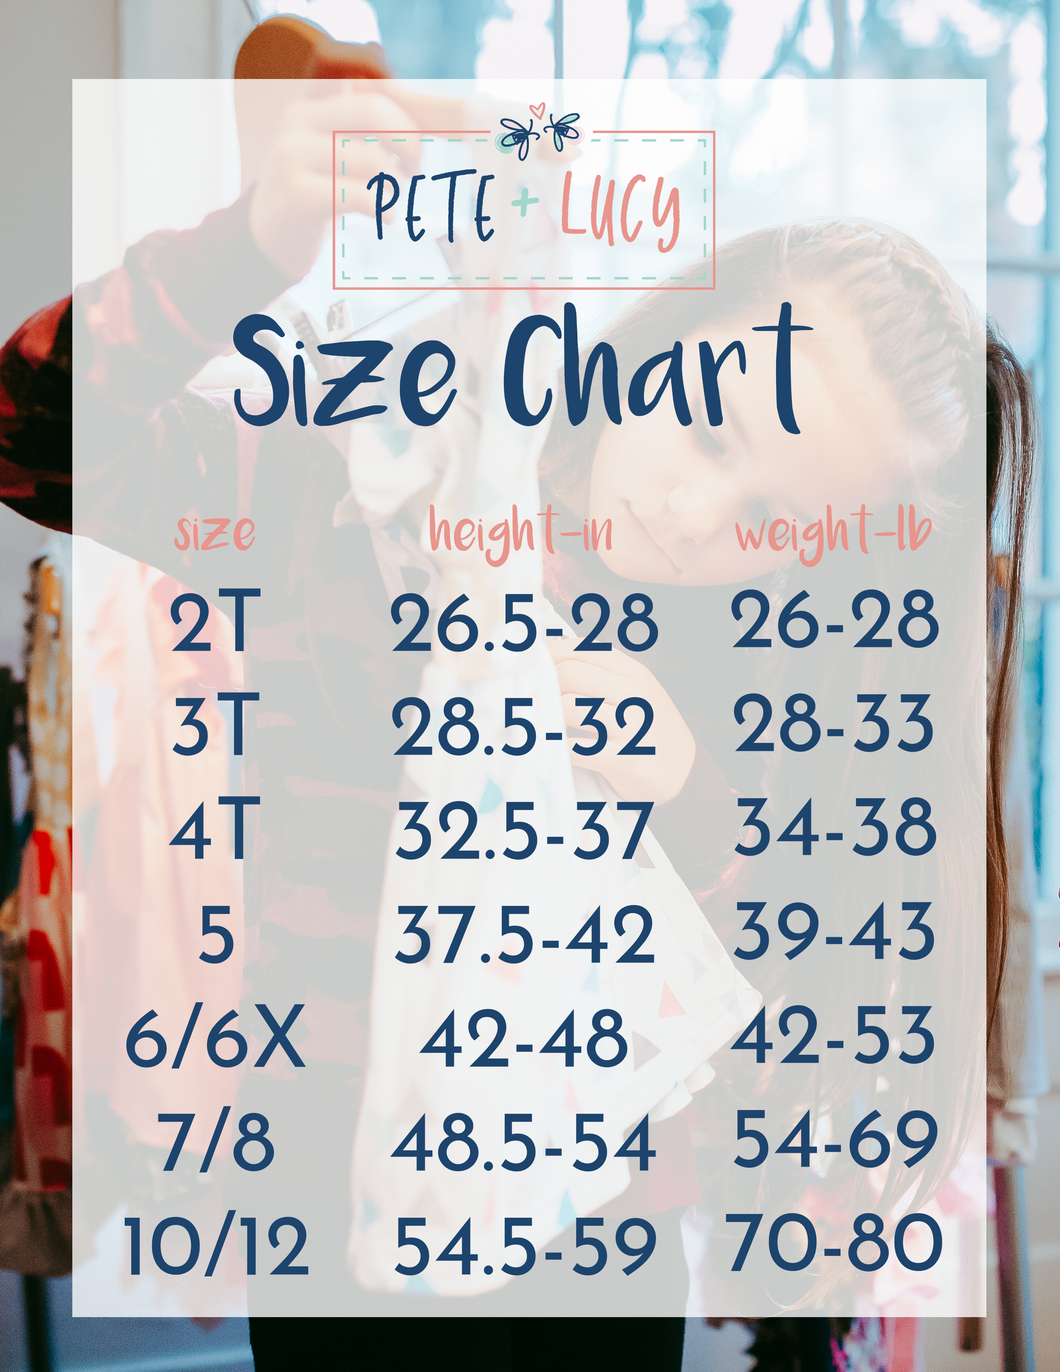 Pete + Lucy Child Size Chart